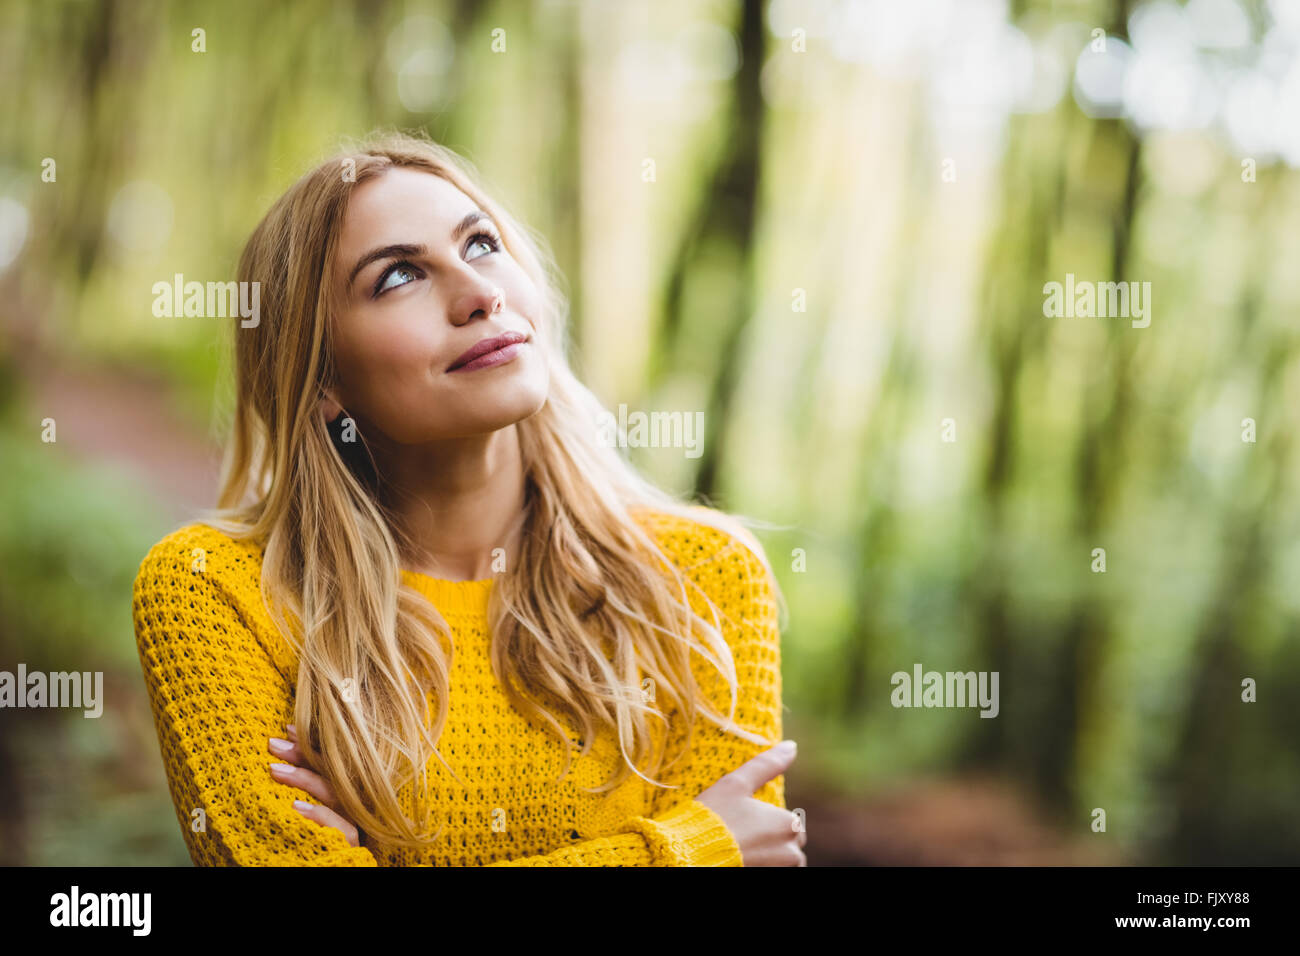 Belle blonde woman day dreaming Banque D'Images